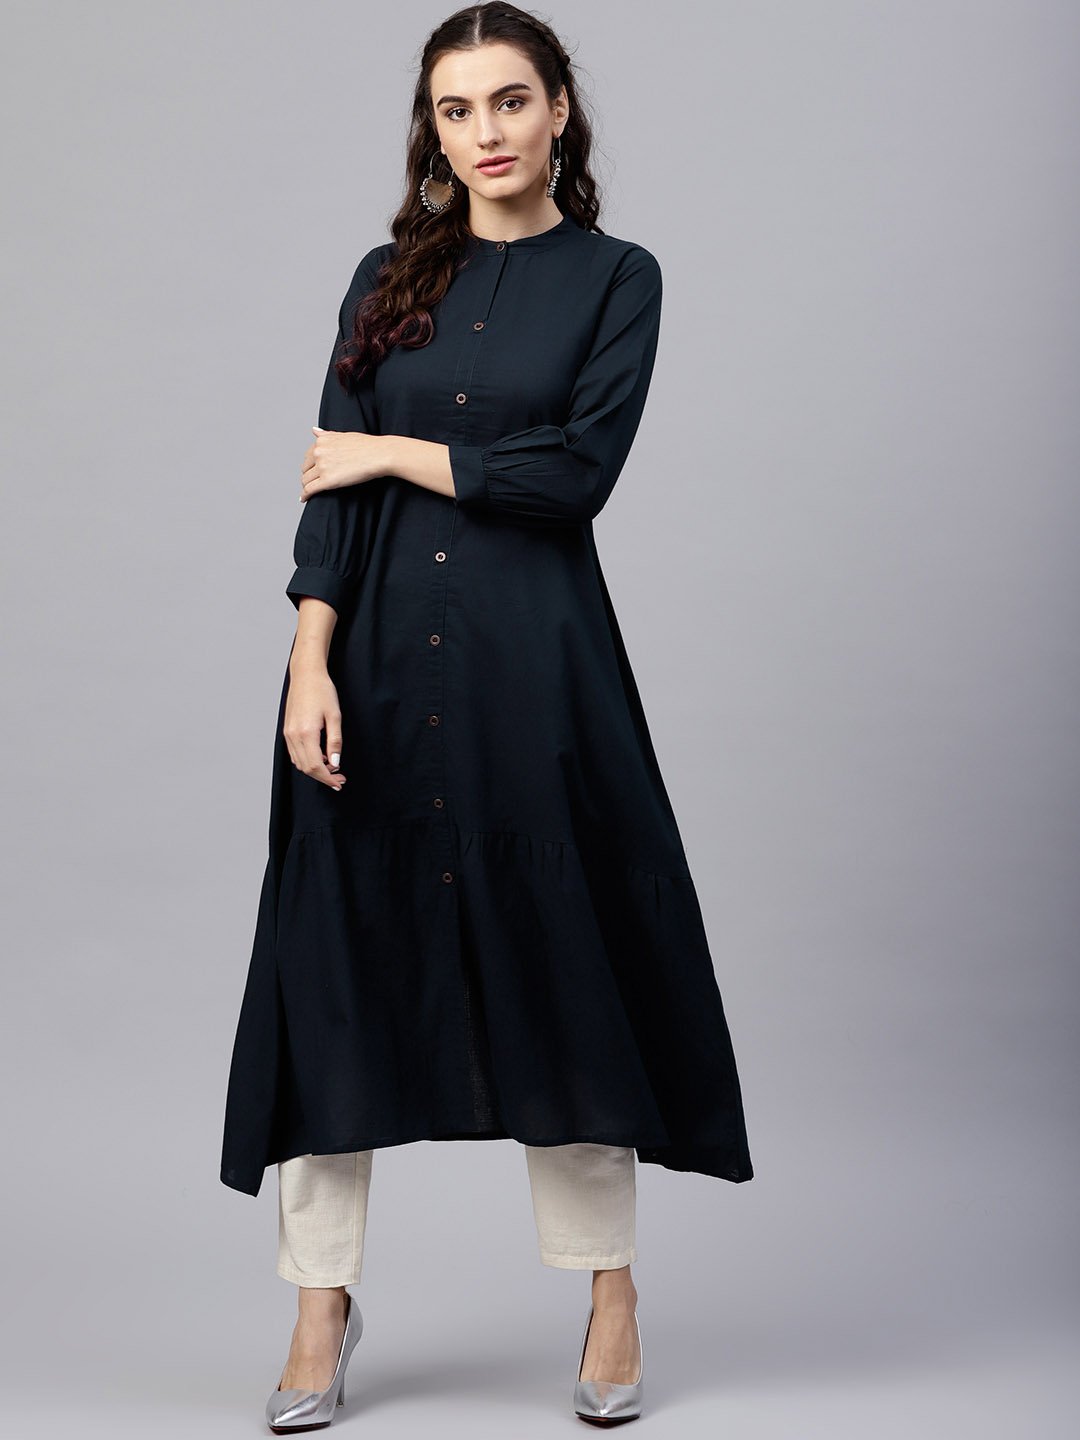 Women's Navy Blue Round Neck A-Line Kurta With Front Placket And Cuffed Full Sleeves - Nayo Clothing